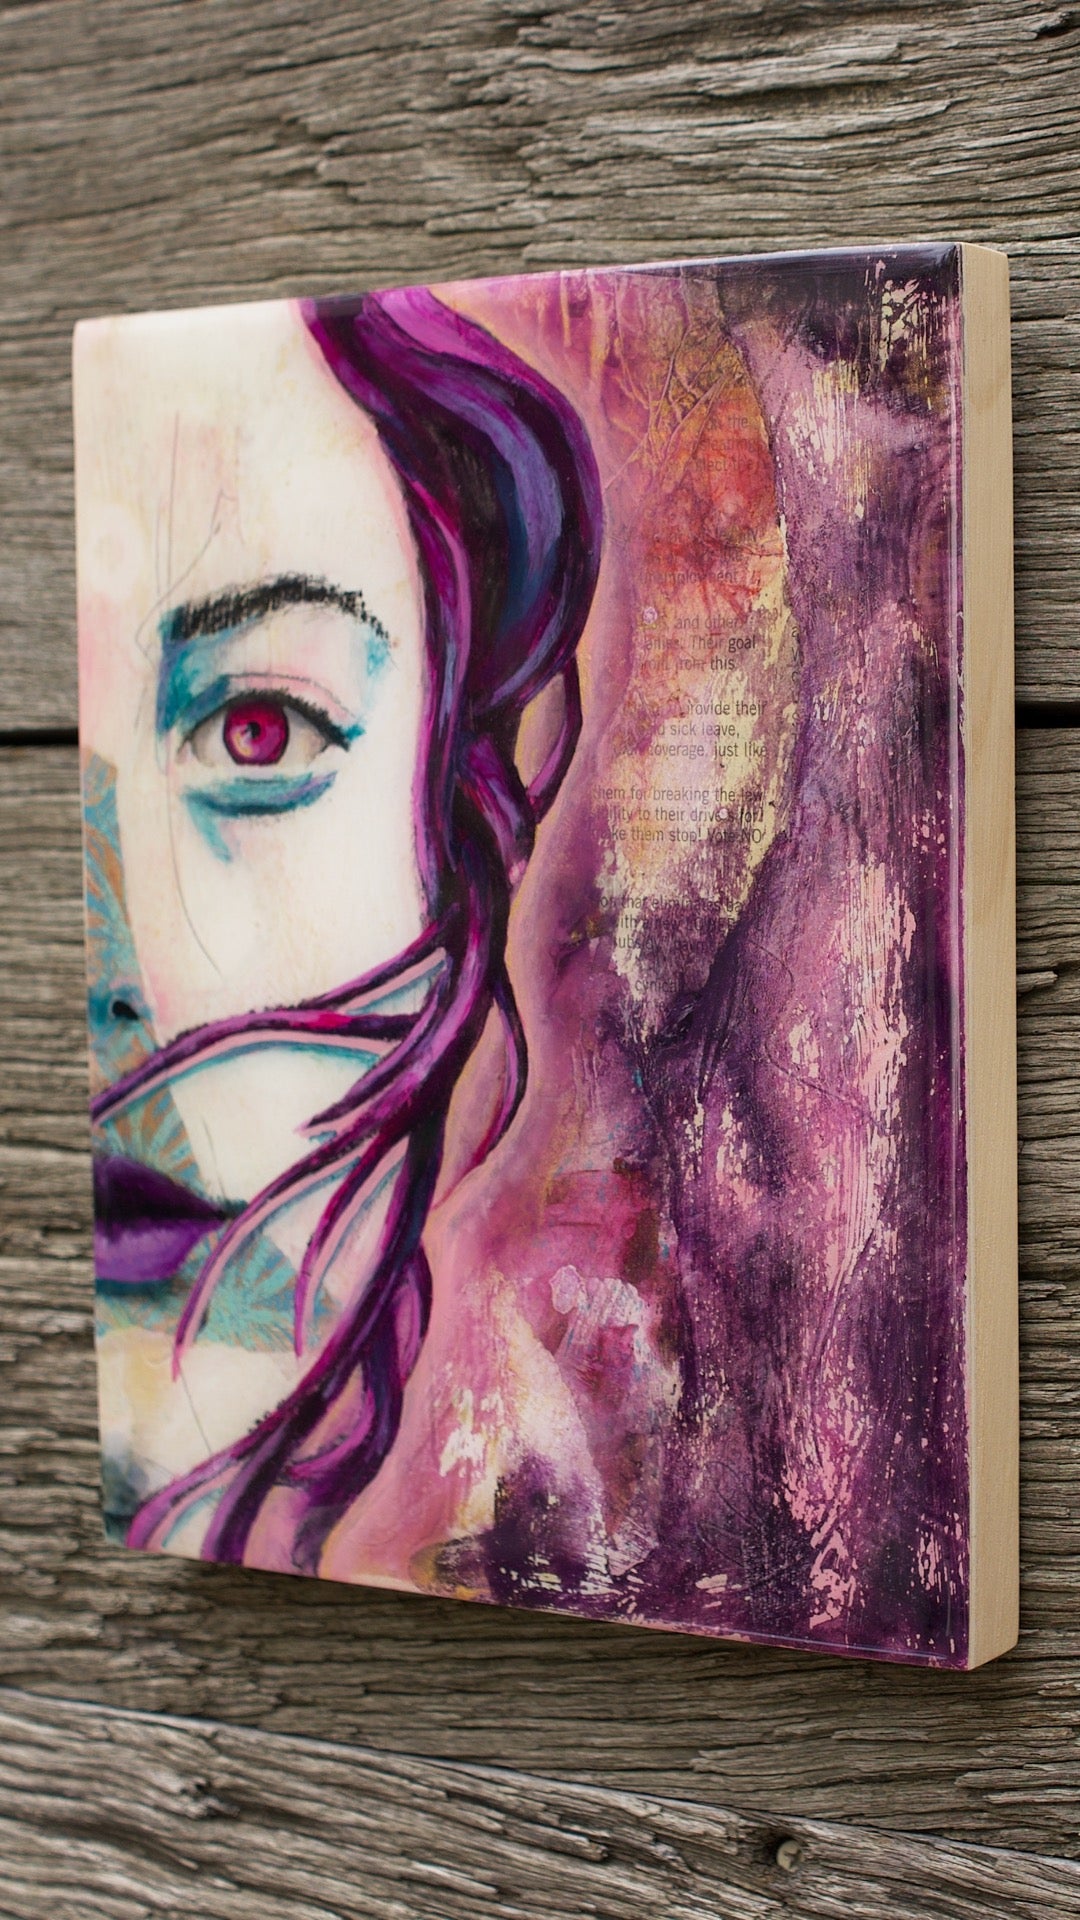 abstract art portait of a Woman on Panel art wall painting Blue, Pink, Purple 8" x 10" artists in melbourne